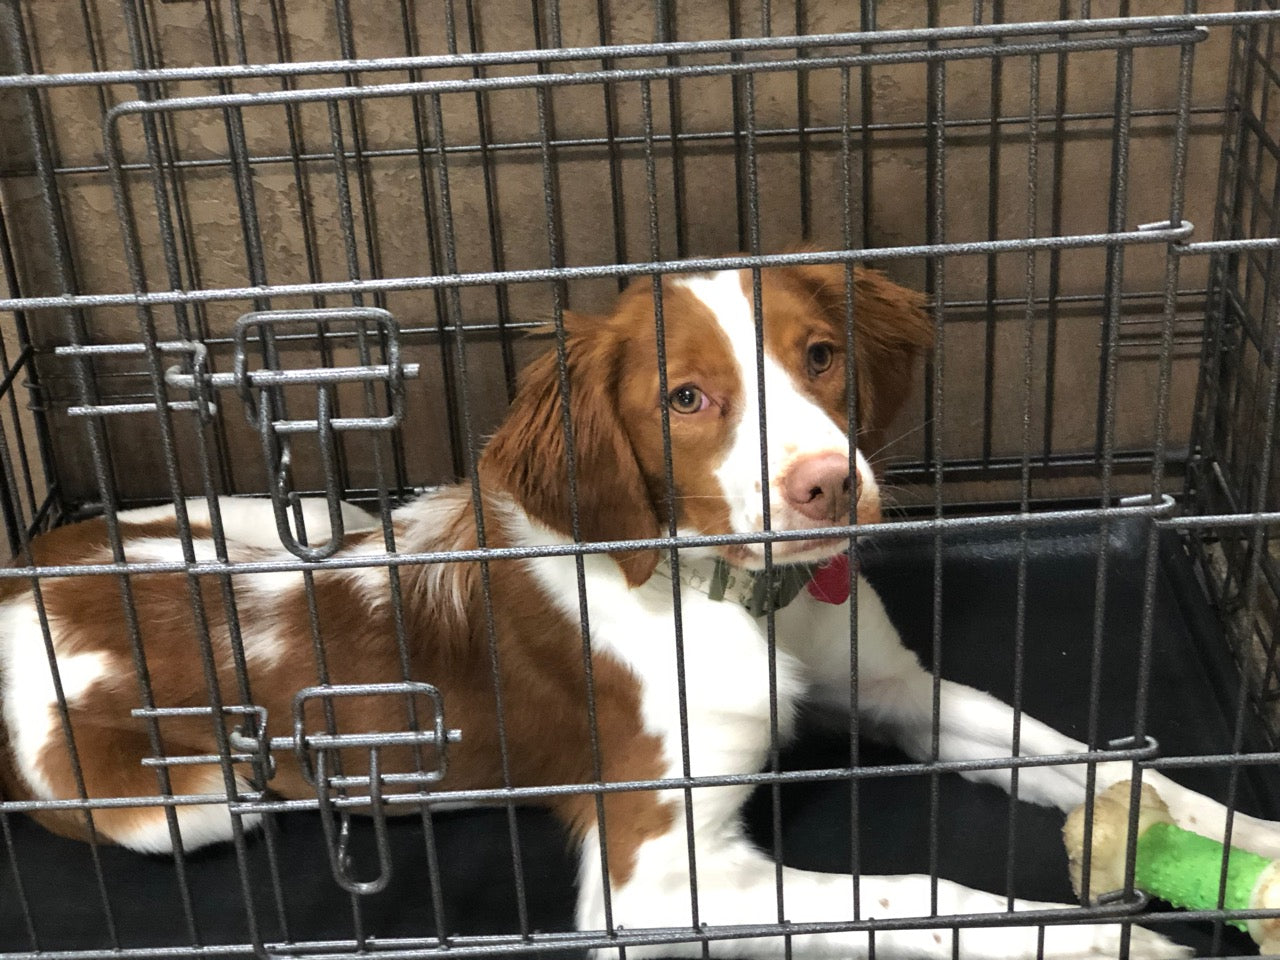 5 SURPRISING BENEFITS OF CRATE TRAINING AND HOW TO DO IT RIGHT